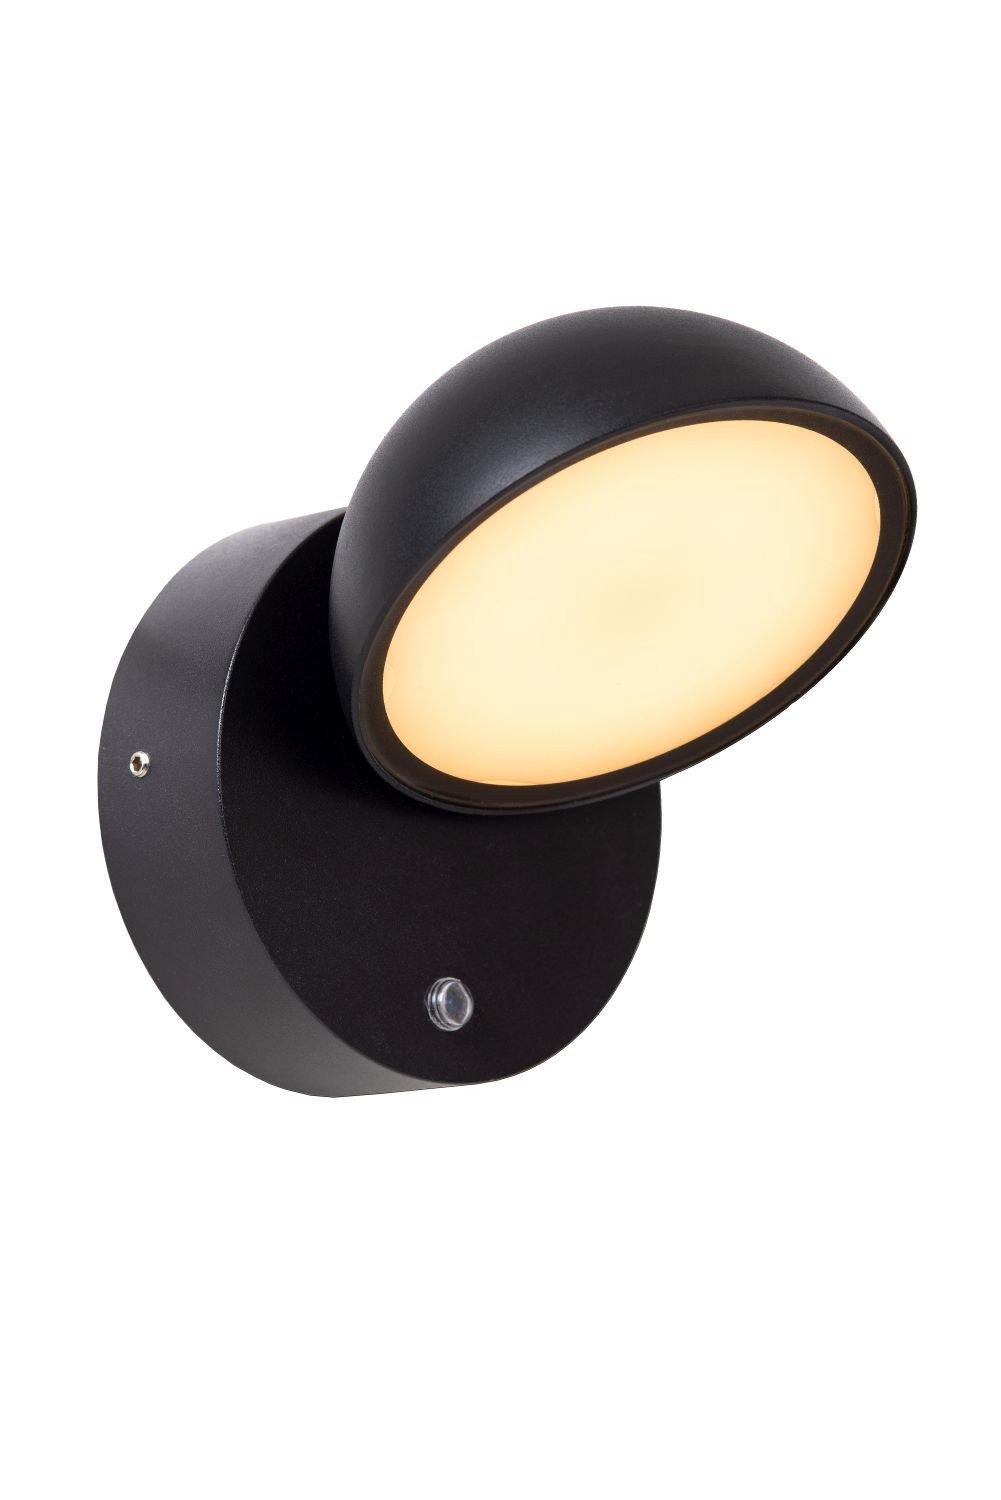 Lucide FINN IP54 Outdoor Wall Light 12W, Non Dimmable Day / Night Sensor Lamp